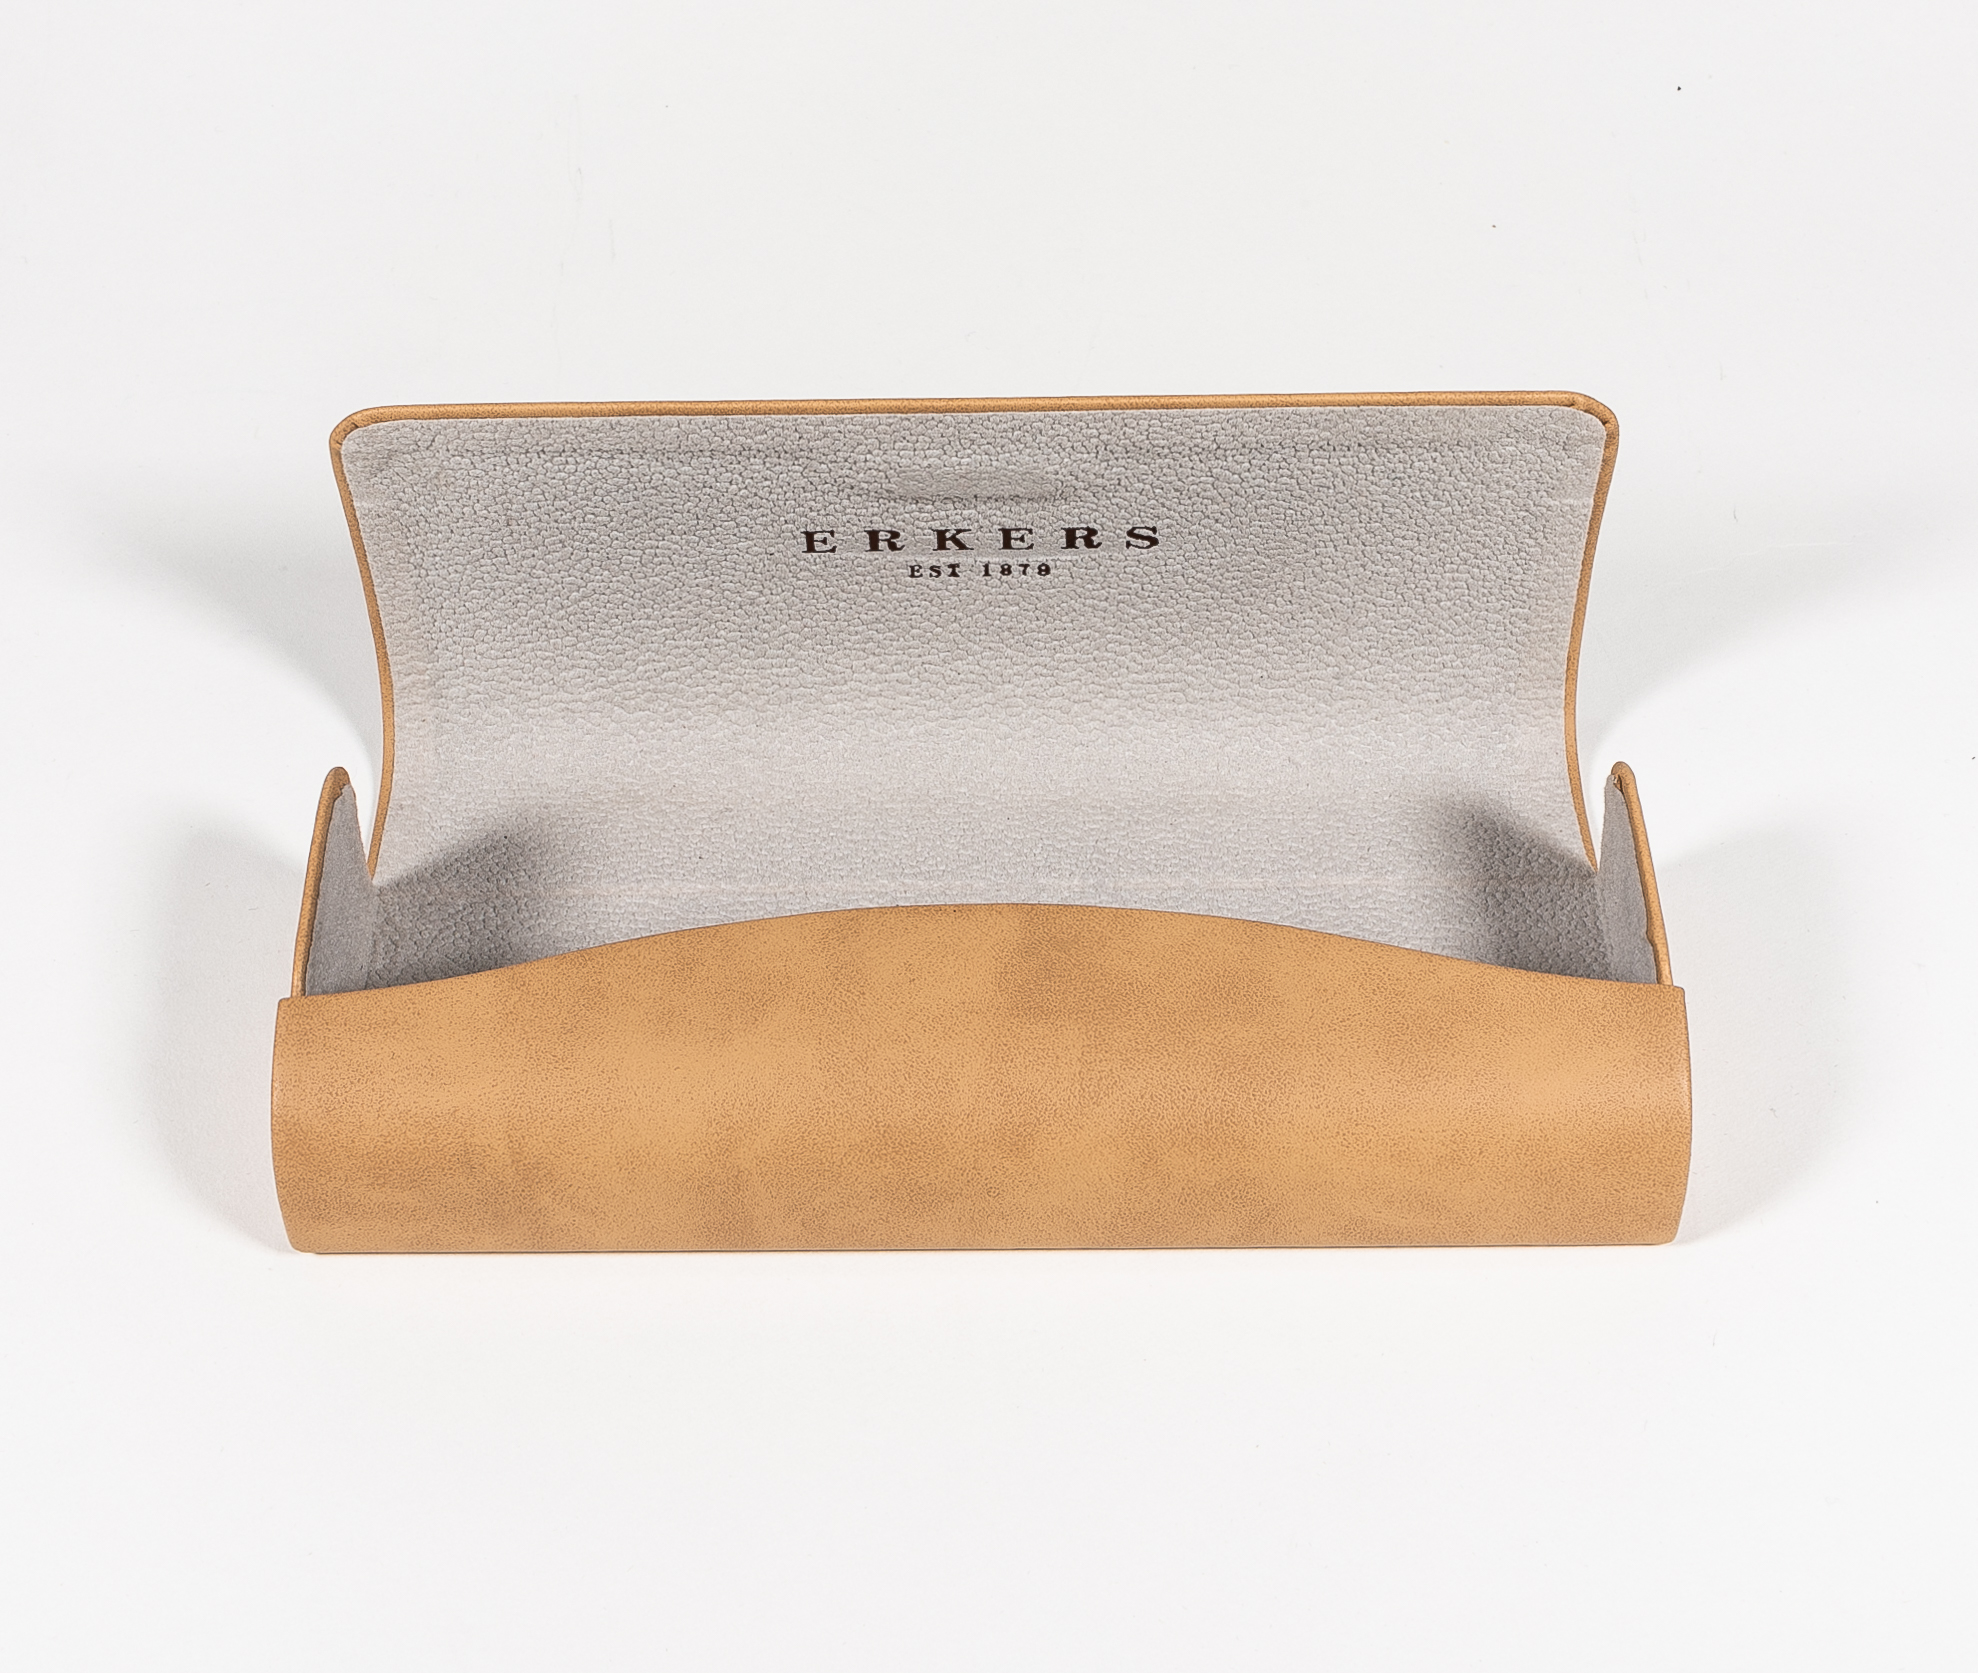 The 2021 Sunglasses, in Three Colors, Feature A Semi-circular Handmade Case on The Side